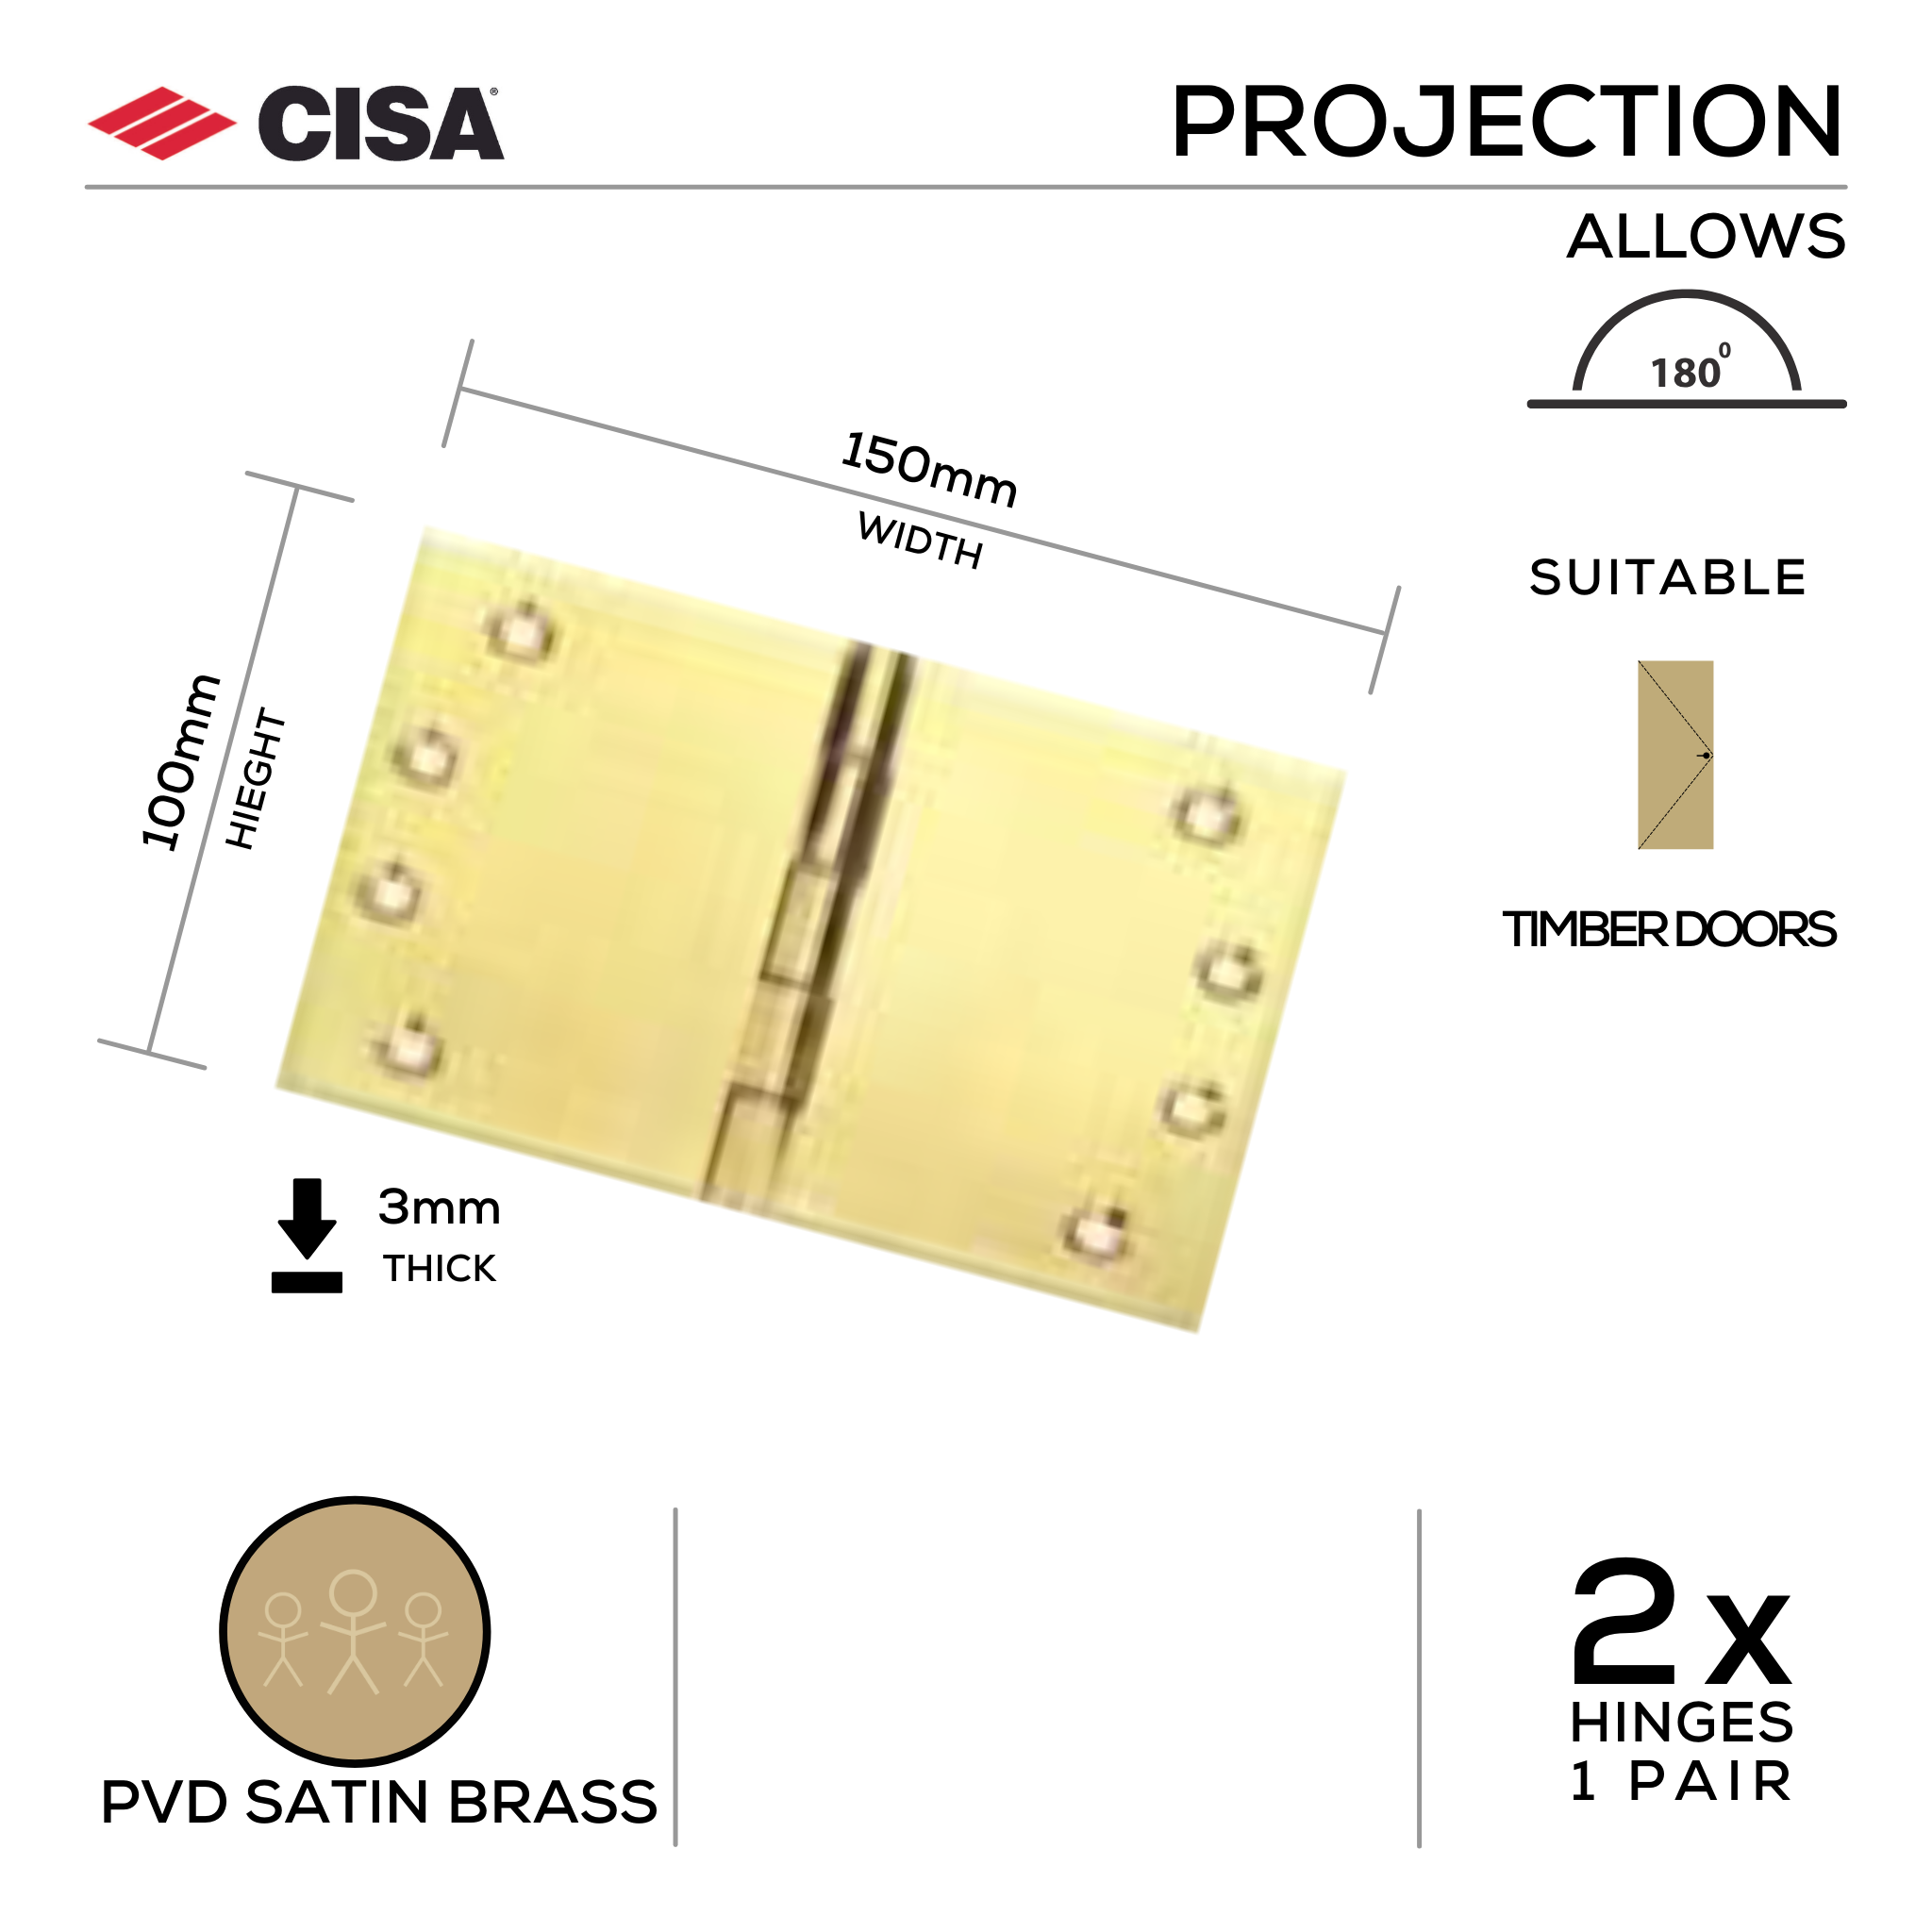 FH150X3-BR, Projection Hinge, 2 x Hinges (1 Pair), 100mm (h) x 150mm (w) x 3mm (t), PVD Satin Brass, CISA